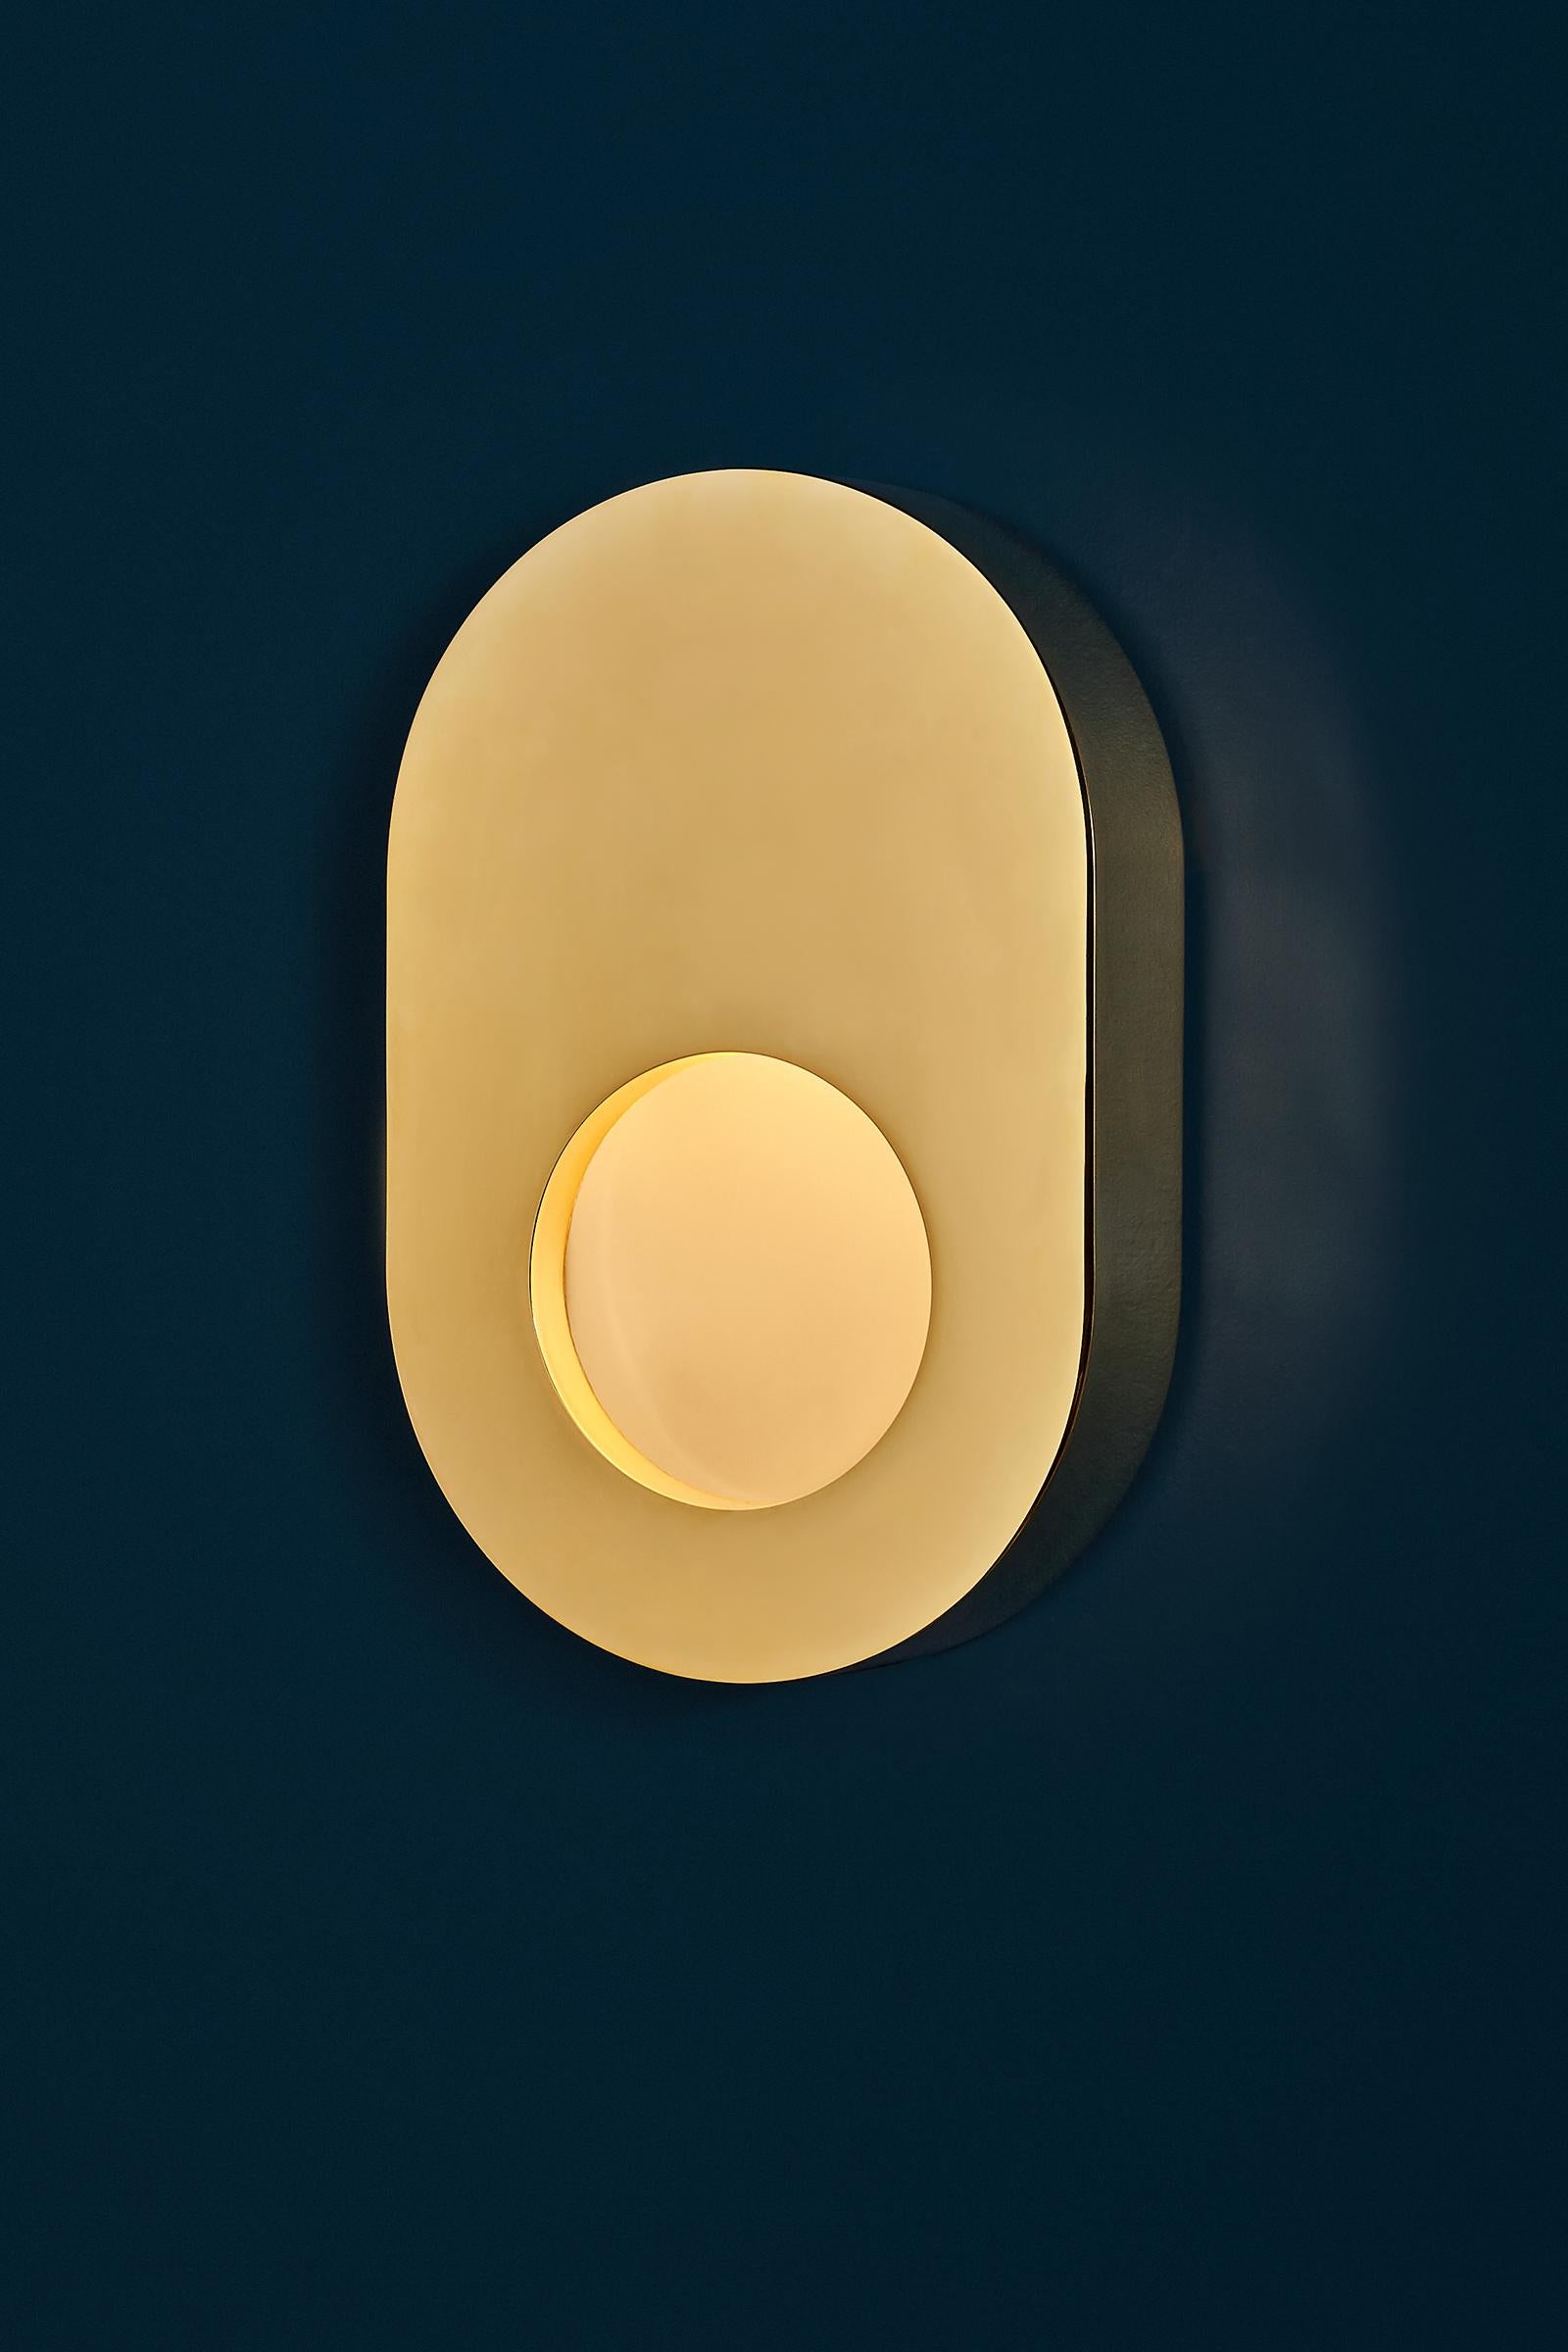 The Portal Sconce features a hand-finished brass body and an inset light diffused through textured glass, creating a warm, delicate glow. 

This sconce is made from brass and polished by hand. Also available in an antique brass finish or custom